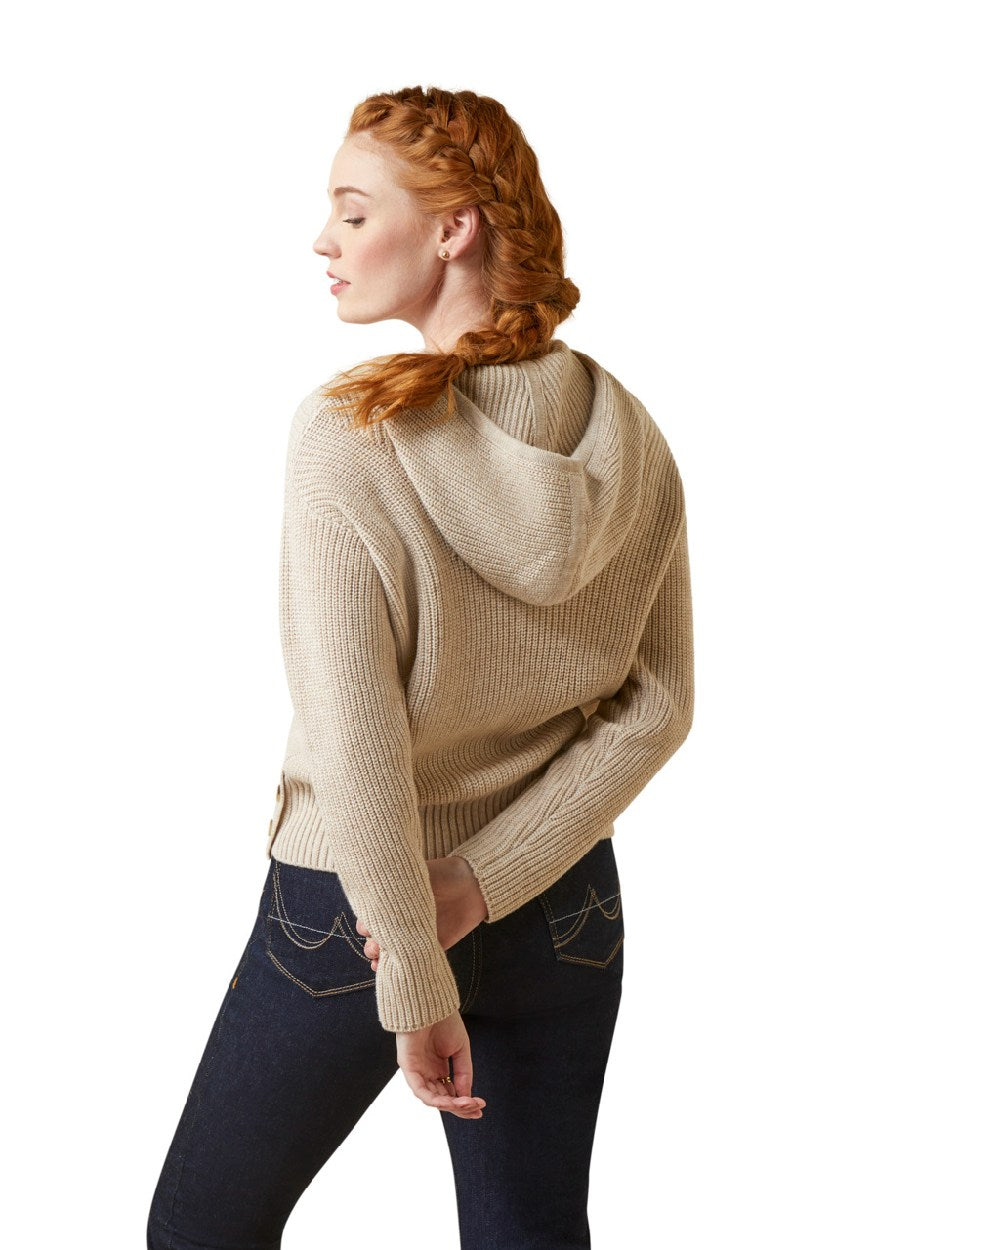 Ariat Womens Los Altos Sweater in Oatmeal heather 